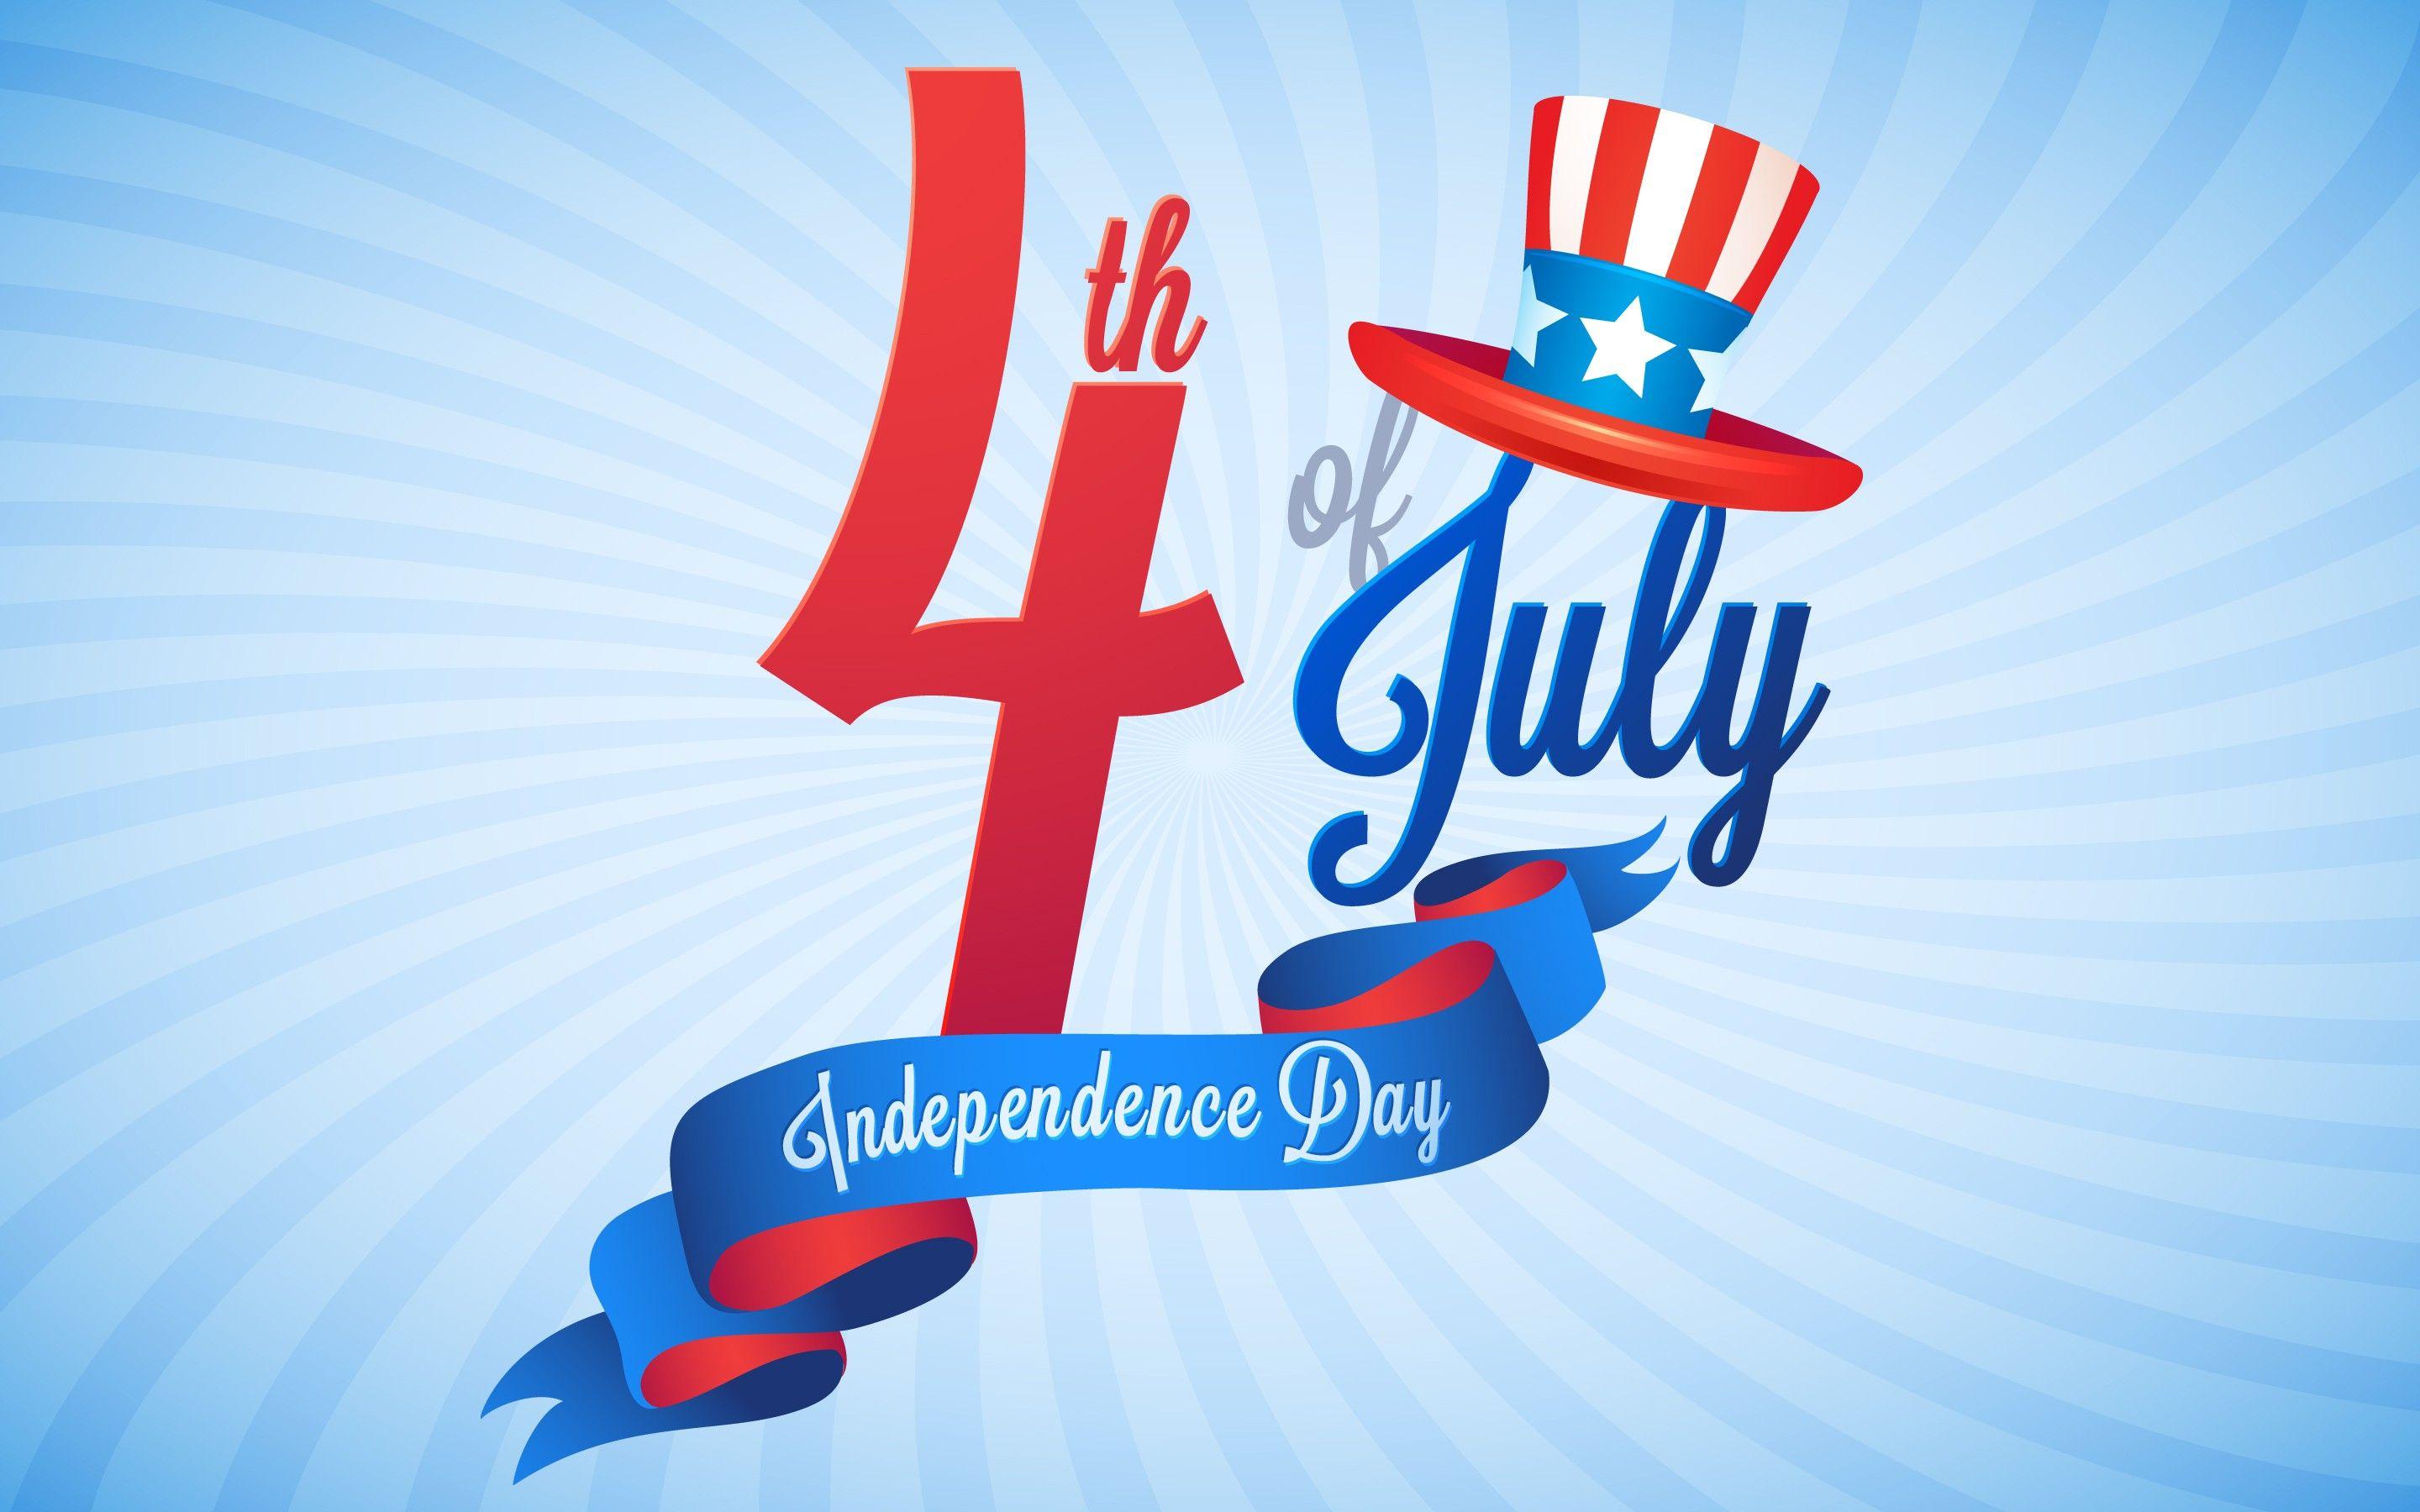 Free HD wallpaper for Independence day / 4th July of USA